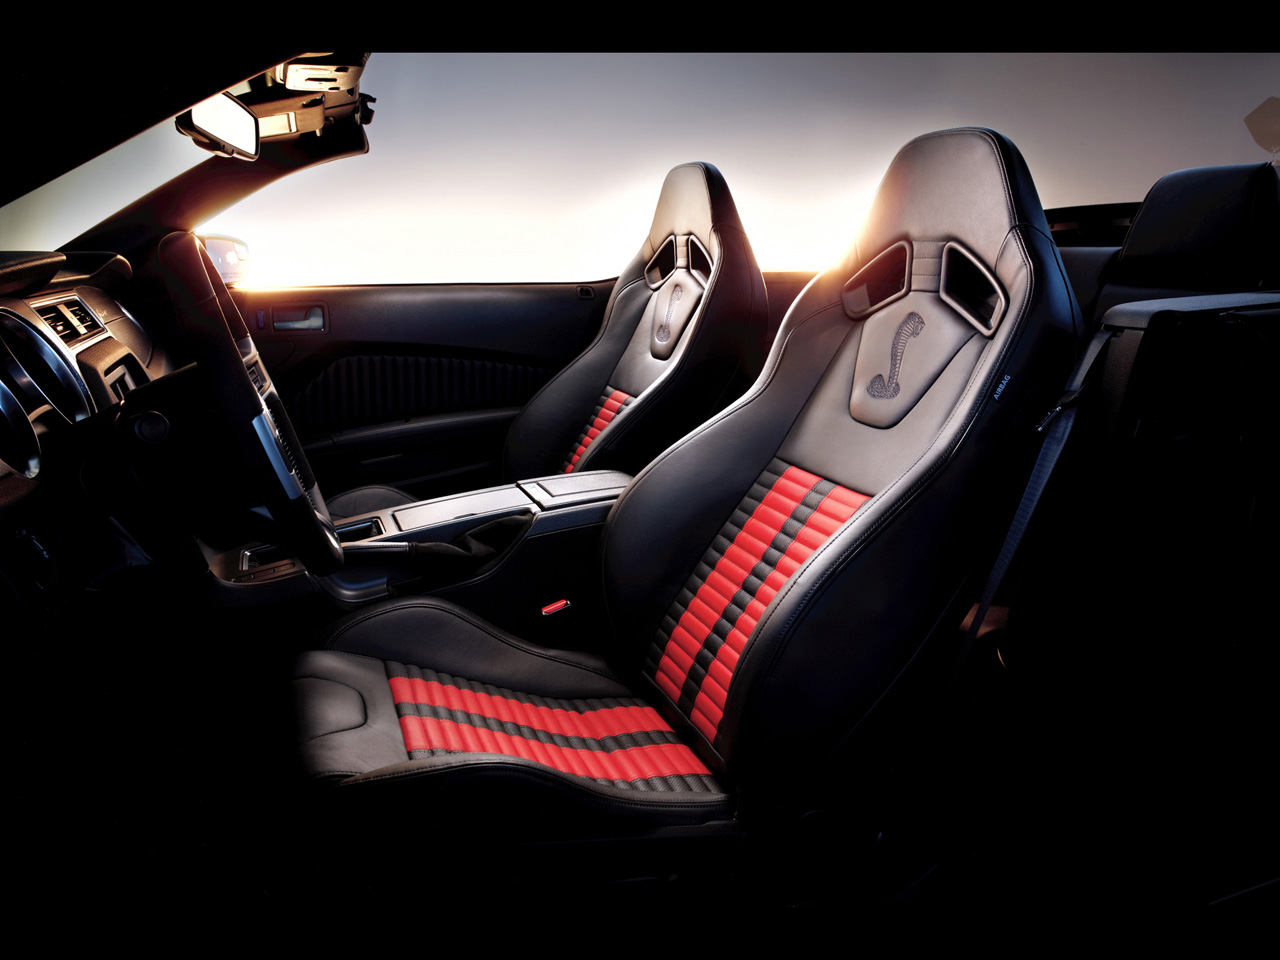  2012 Ford Shelby GT500  2012-Ford-Shelby-GT500-Interior-1280x960